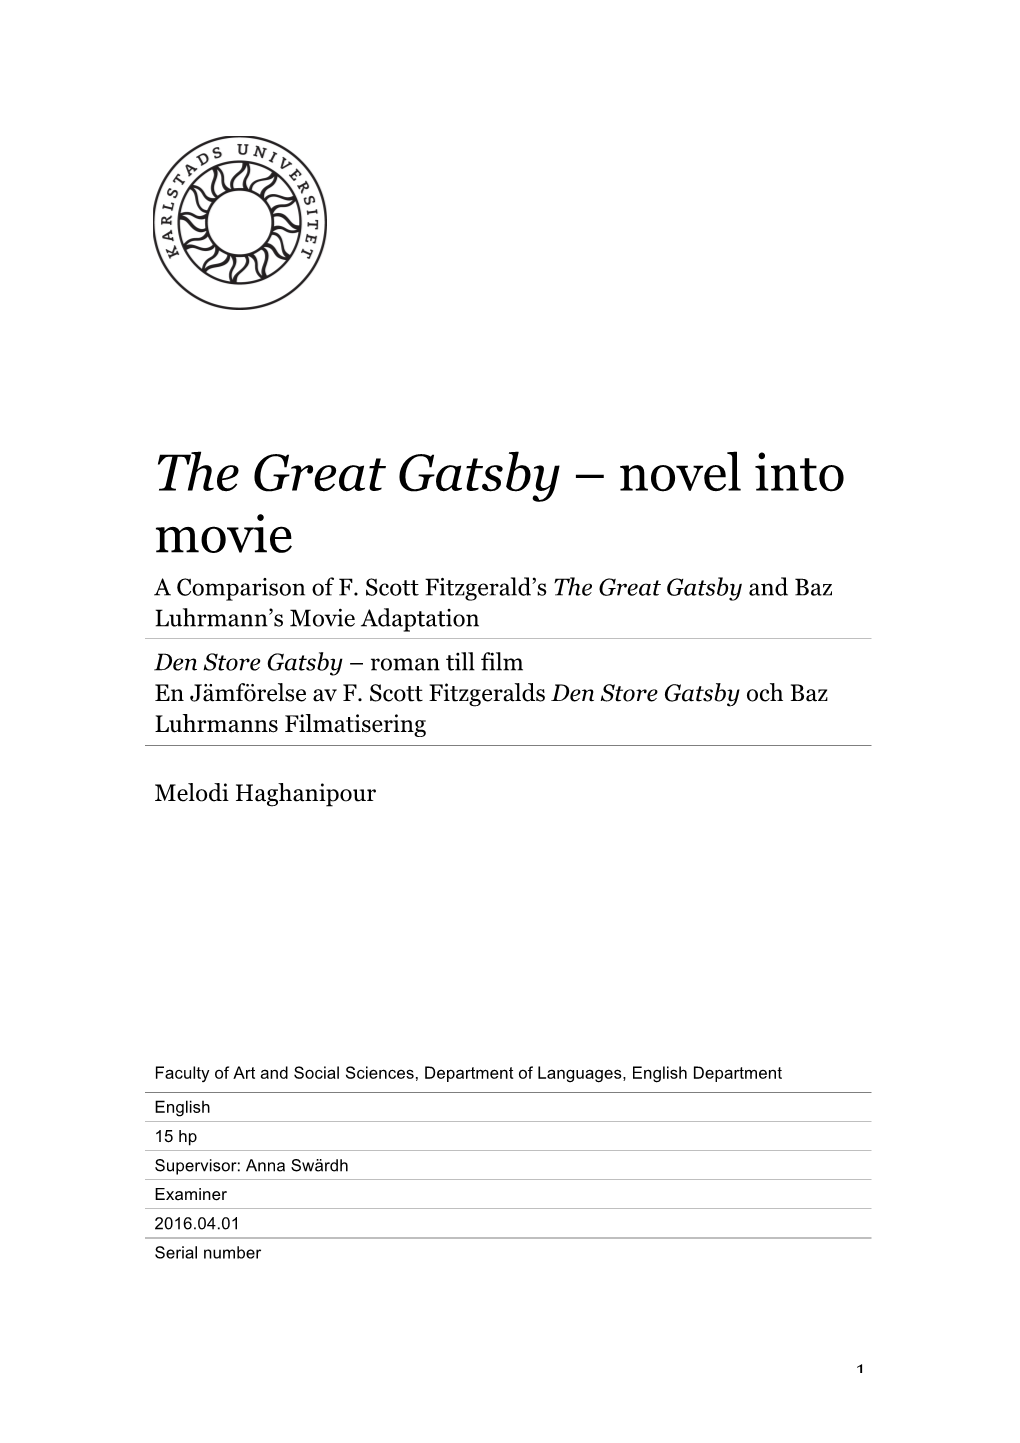 The Great Gatsby – Novel Into Movie a Comparison of F